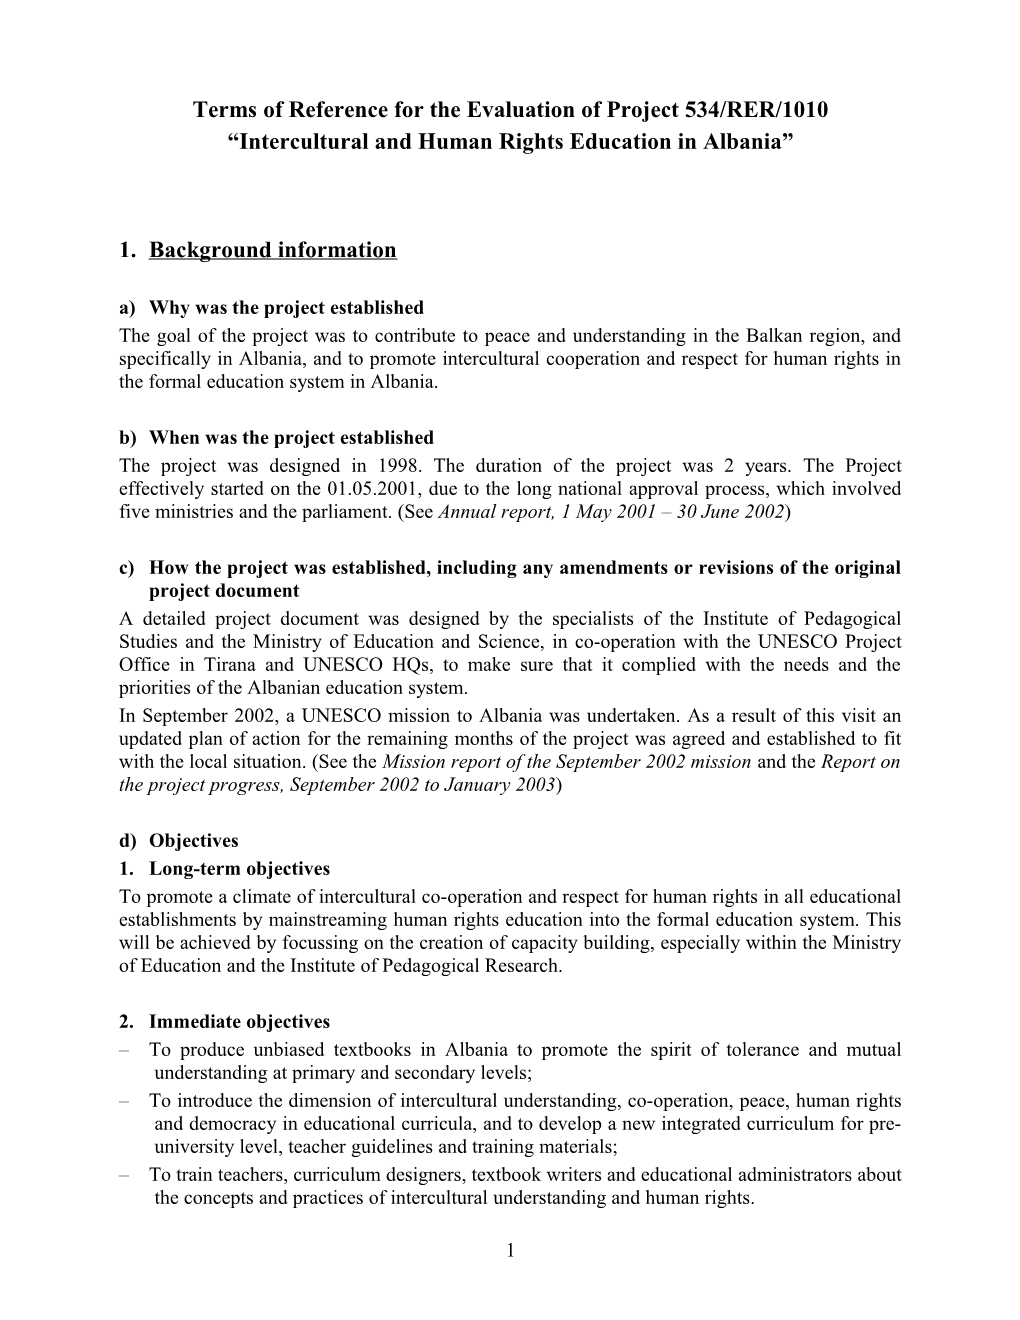 Terms of Reference for the Evaluation of the Project Entitled